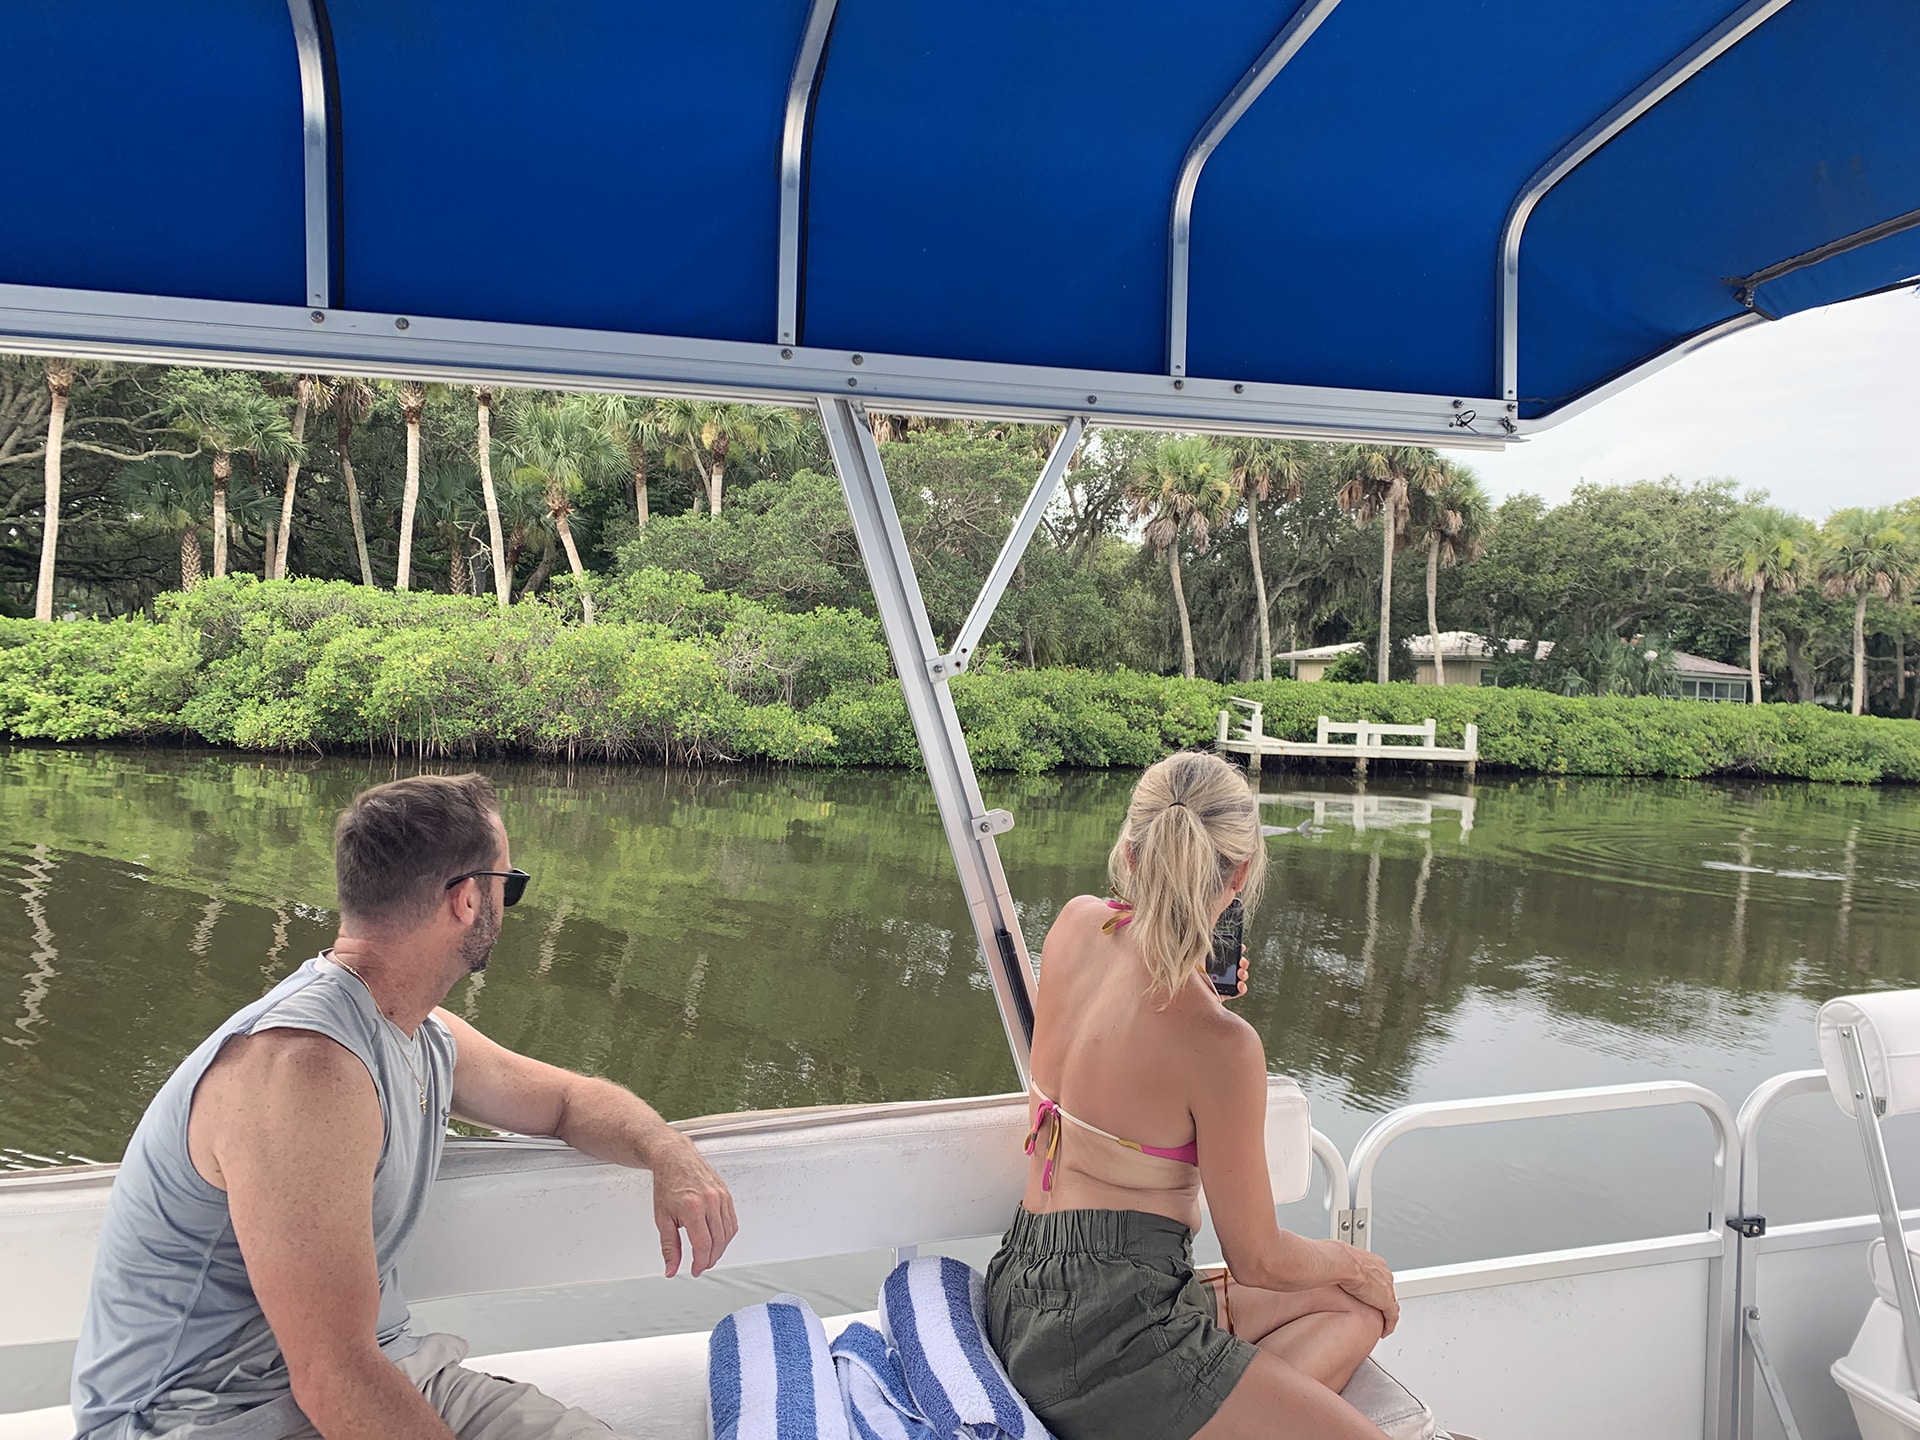 Couple enjoying a sight-seeing boat tour in the Indian River lagoon